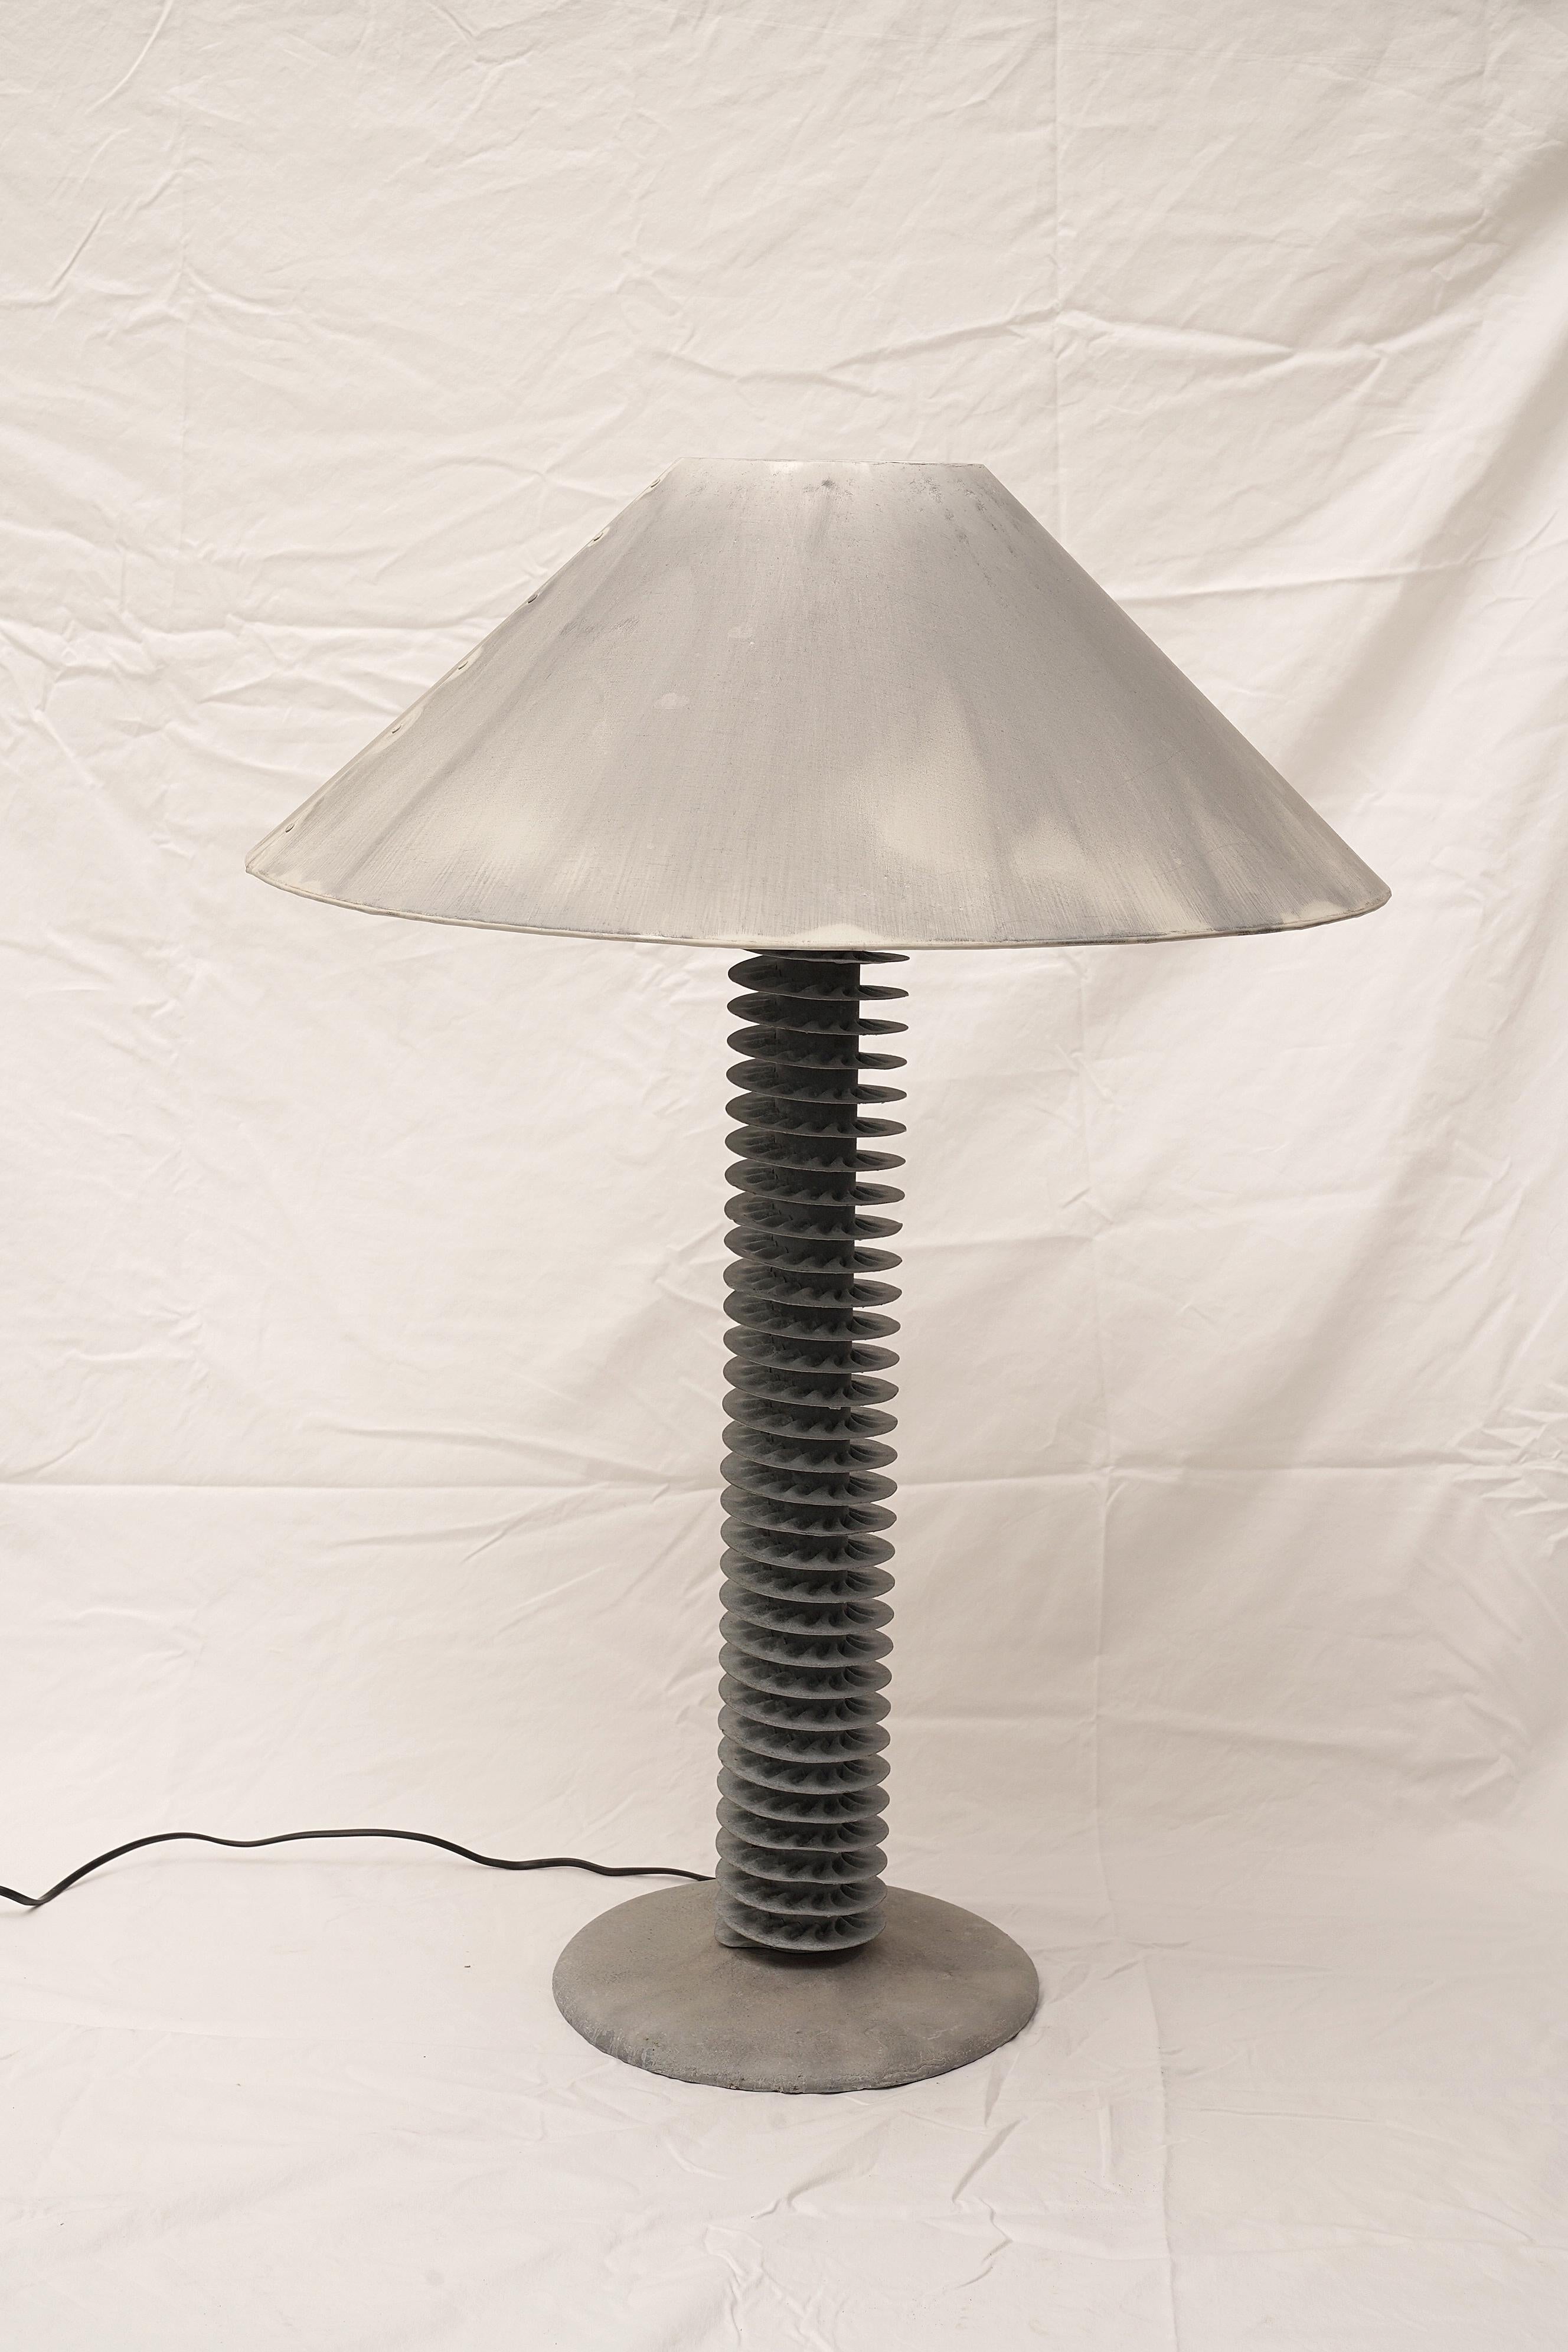 An unusual re-purposing, spiral grey metal water condensers mounted on a cast stone base and stem to make a great pair of table lamps. Gray metal lamp shades with intentional but subtle color variations. American, circa 2000. Shades are 24